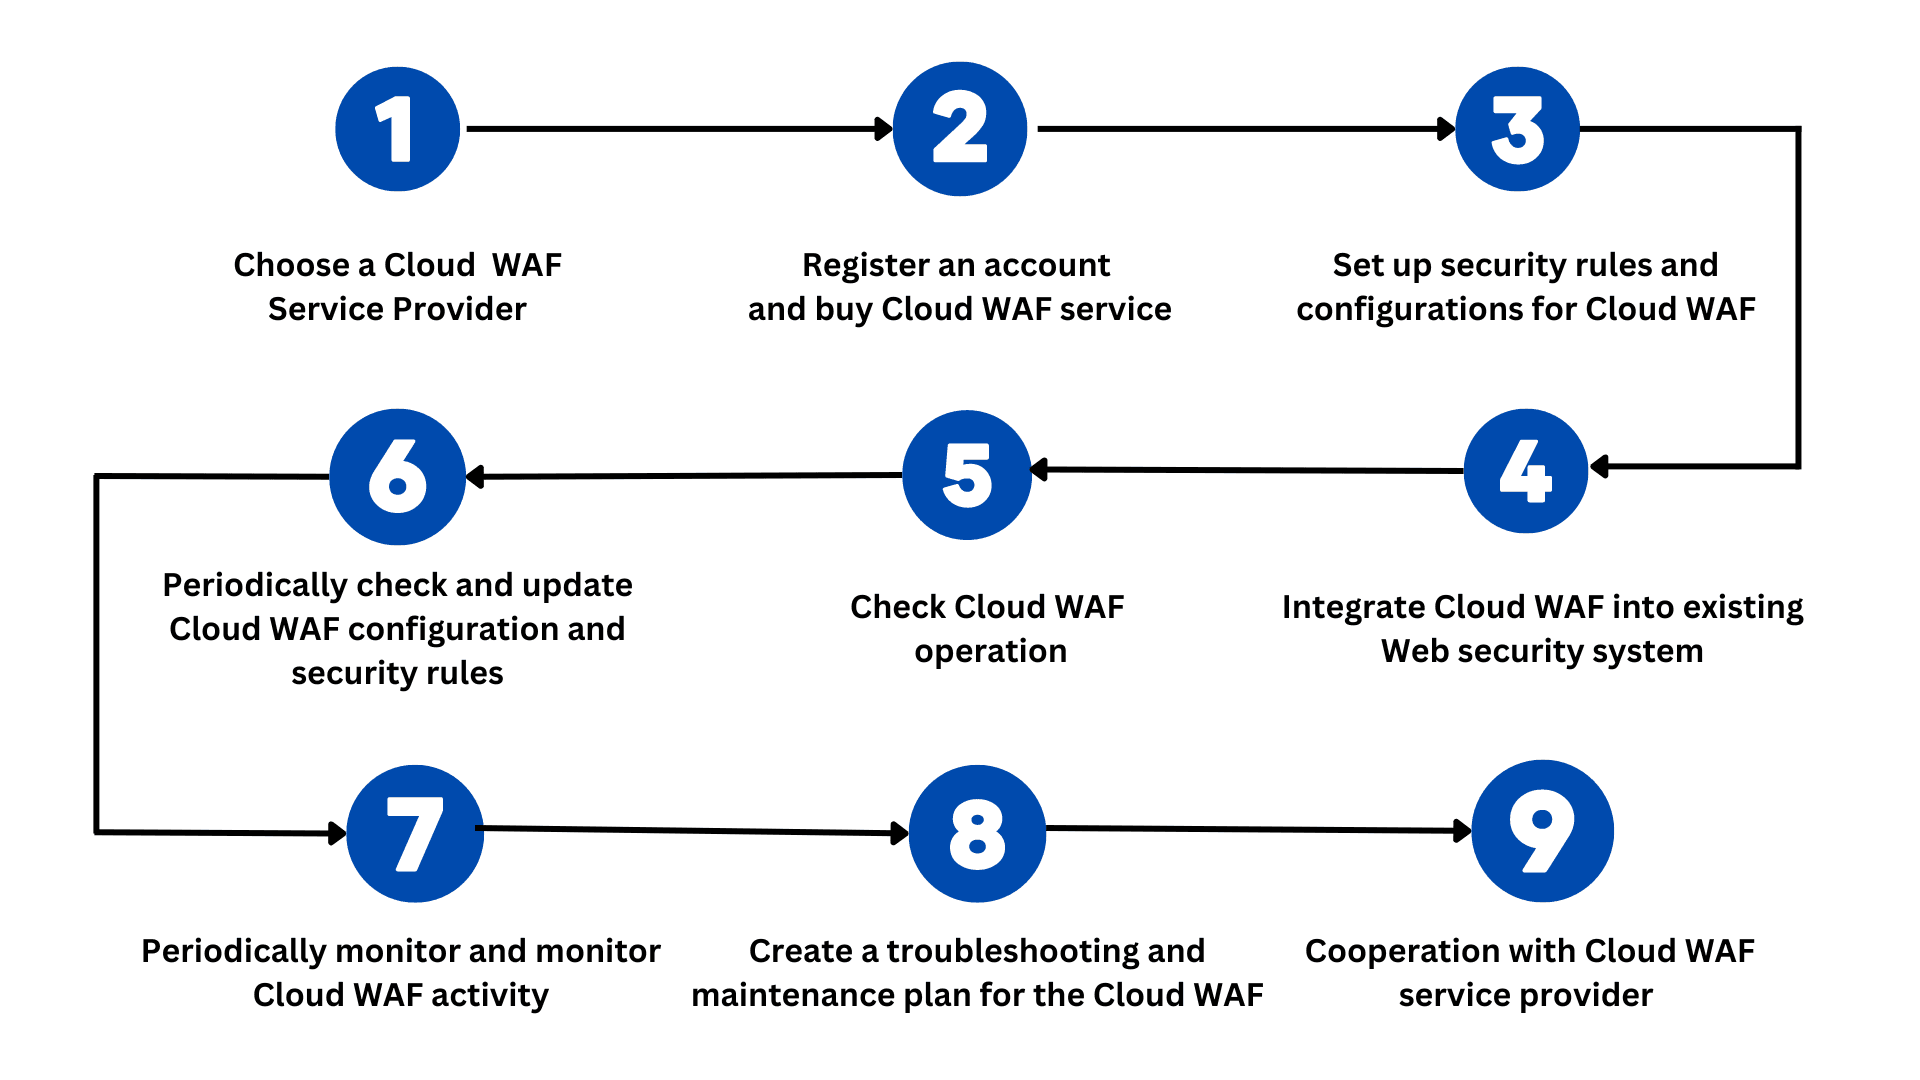 4. Steps to install and integrate Cloud WAF into existing Web security system 